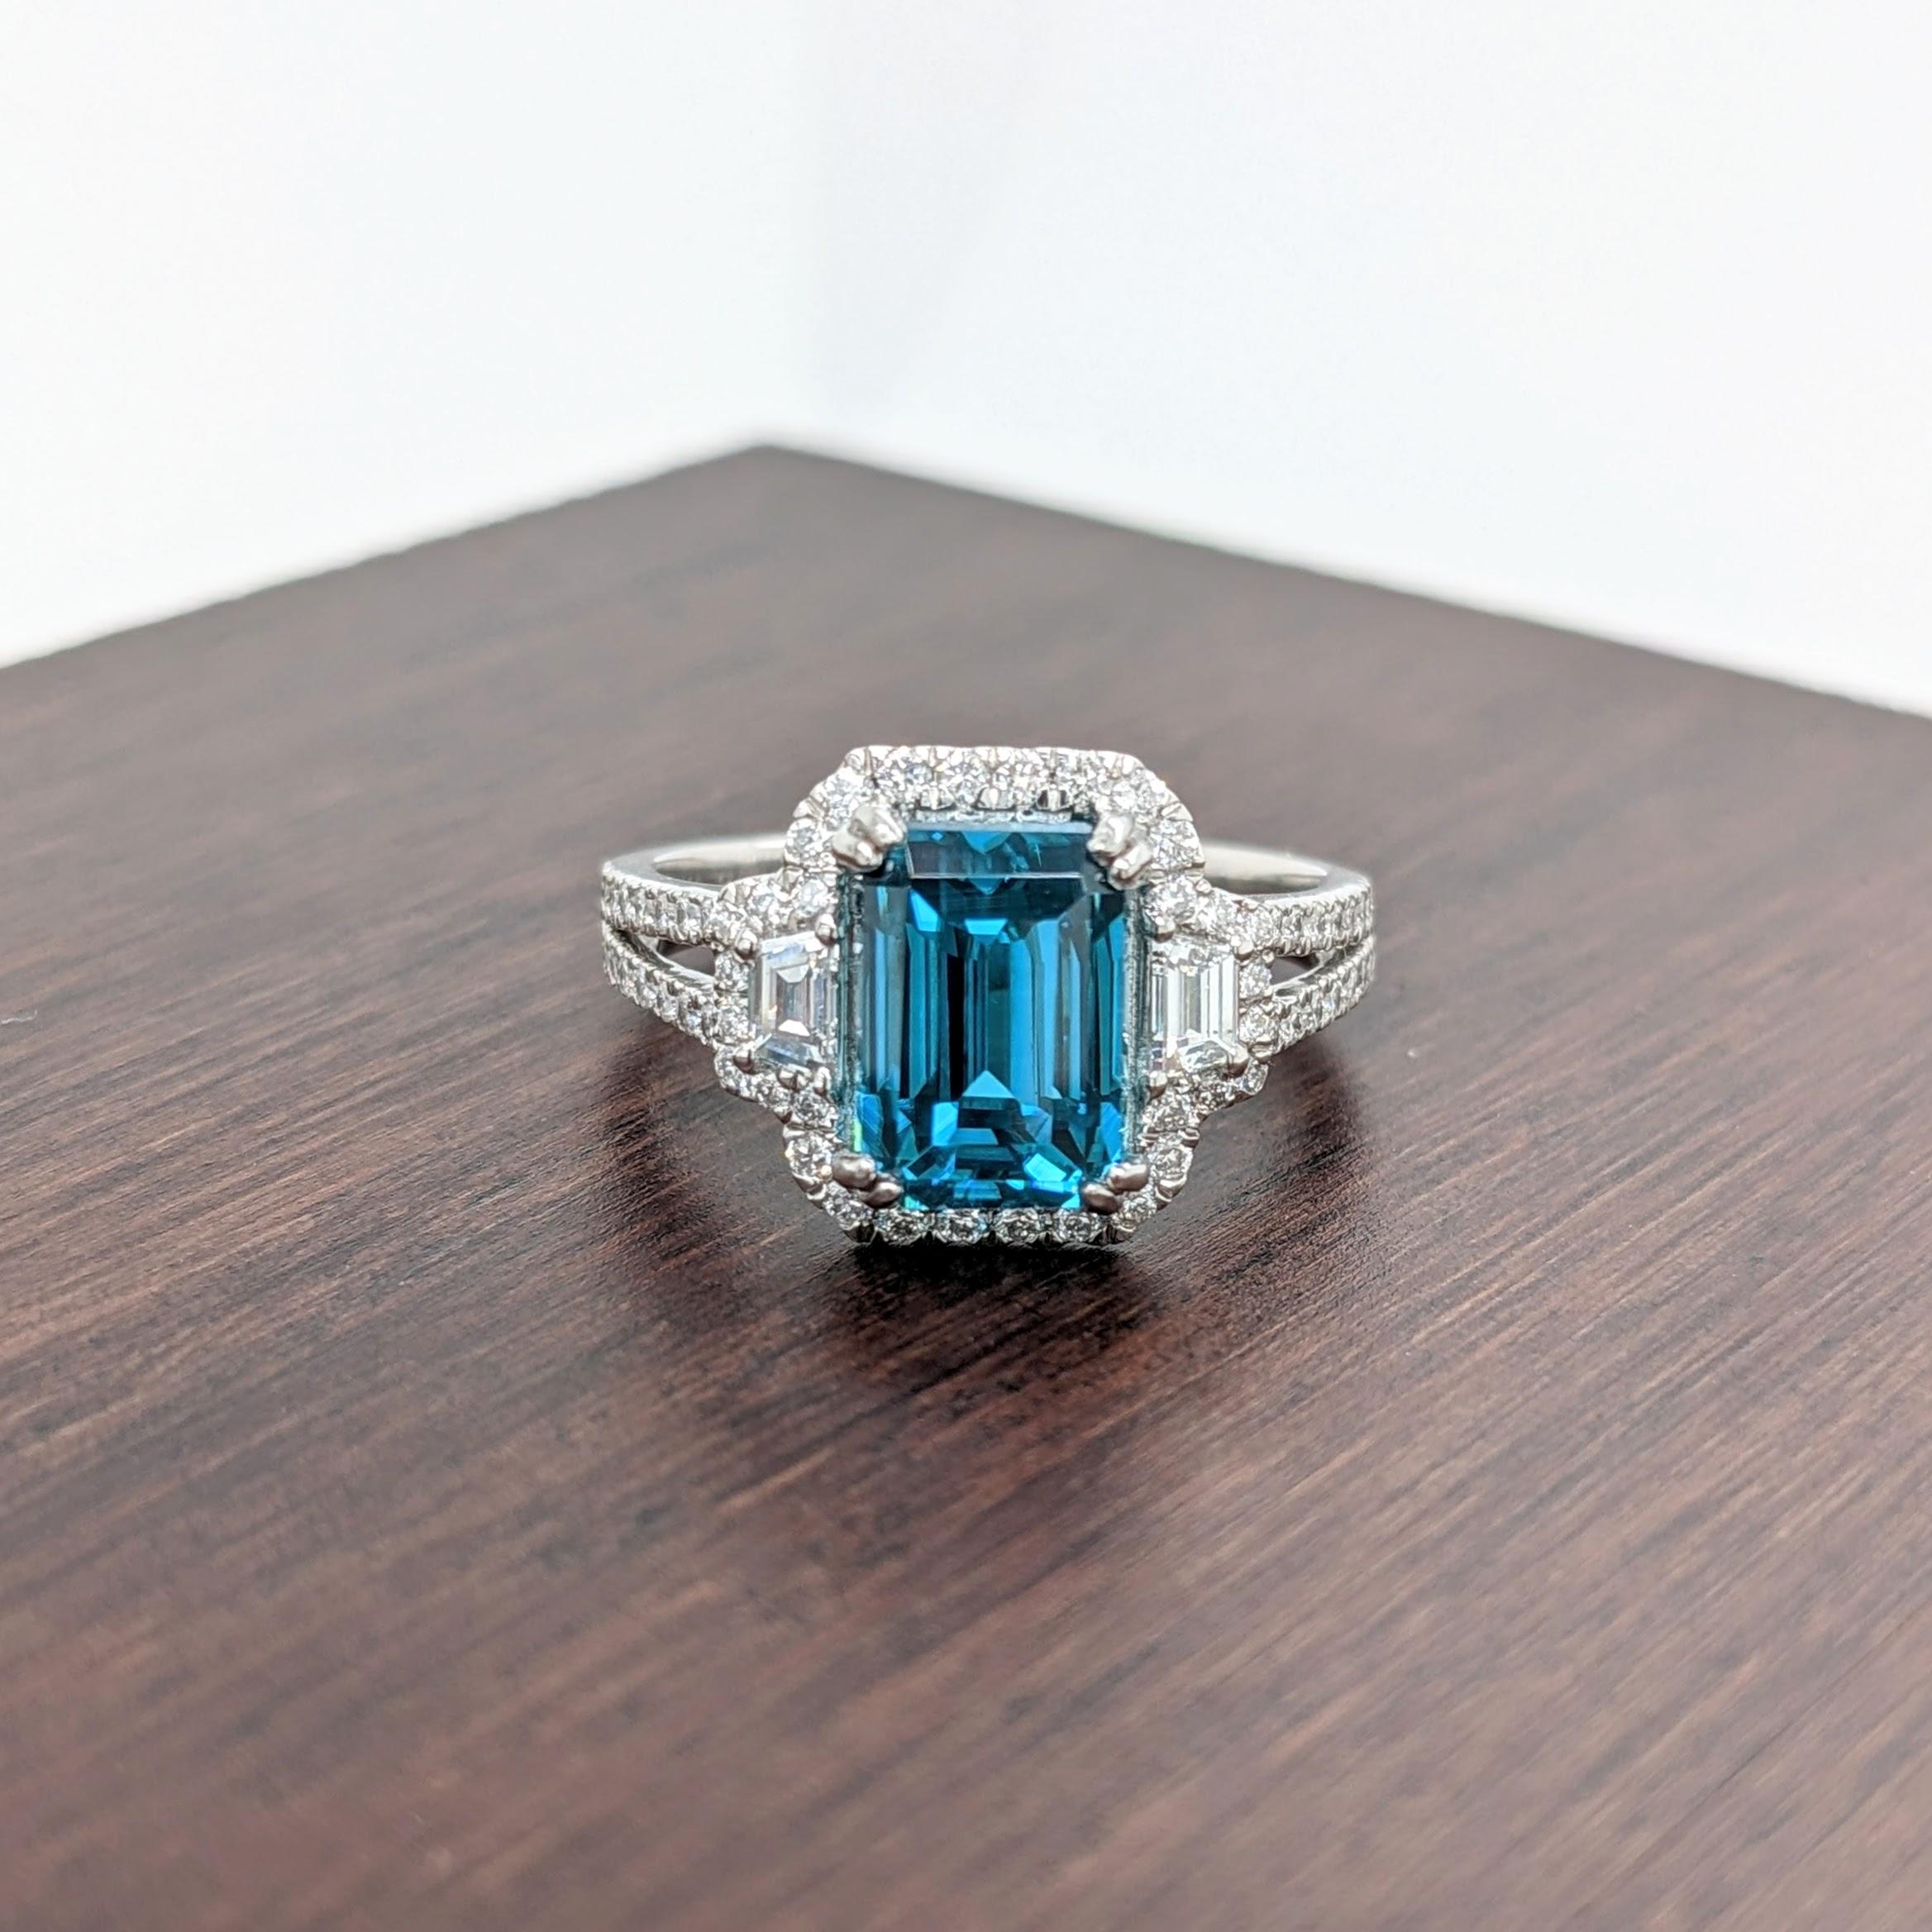 Claim this captivating natural blue zircon for yourself or your loved ones! A masterpiece of nature set in one of our most popular NNJ ring designs made in Platinum with a diamond halo and diamond studded split shank. A gorgeous ring for a modern